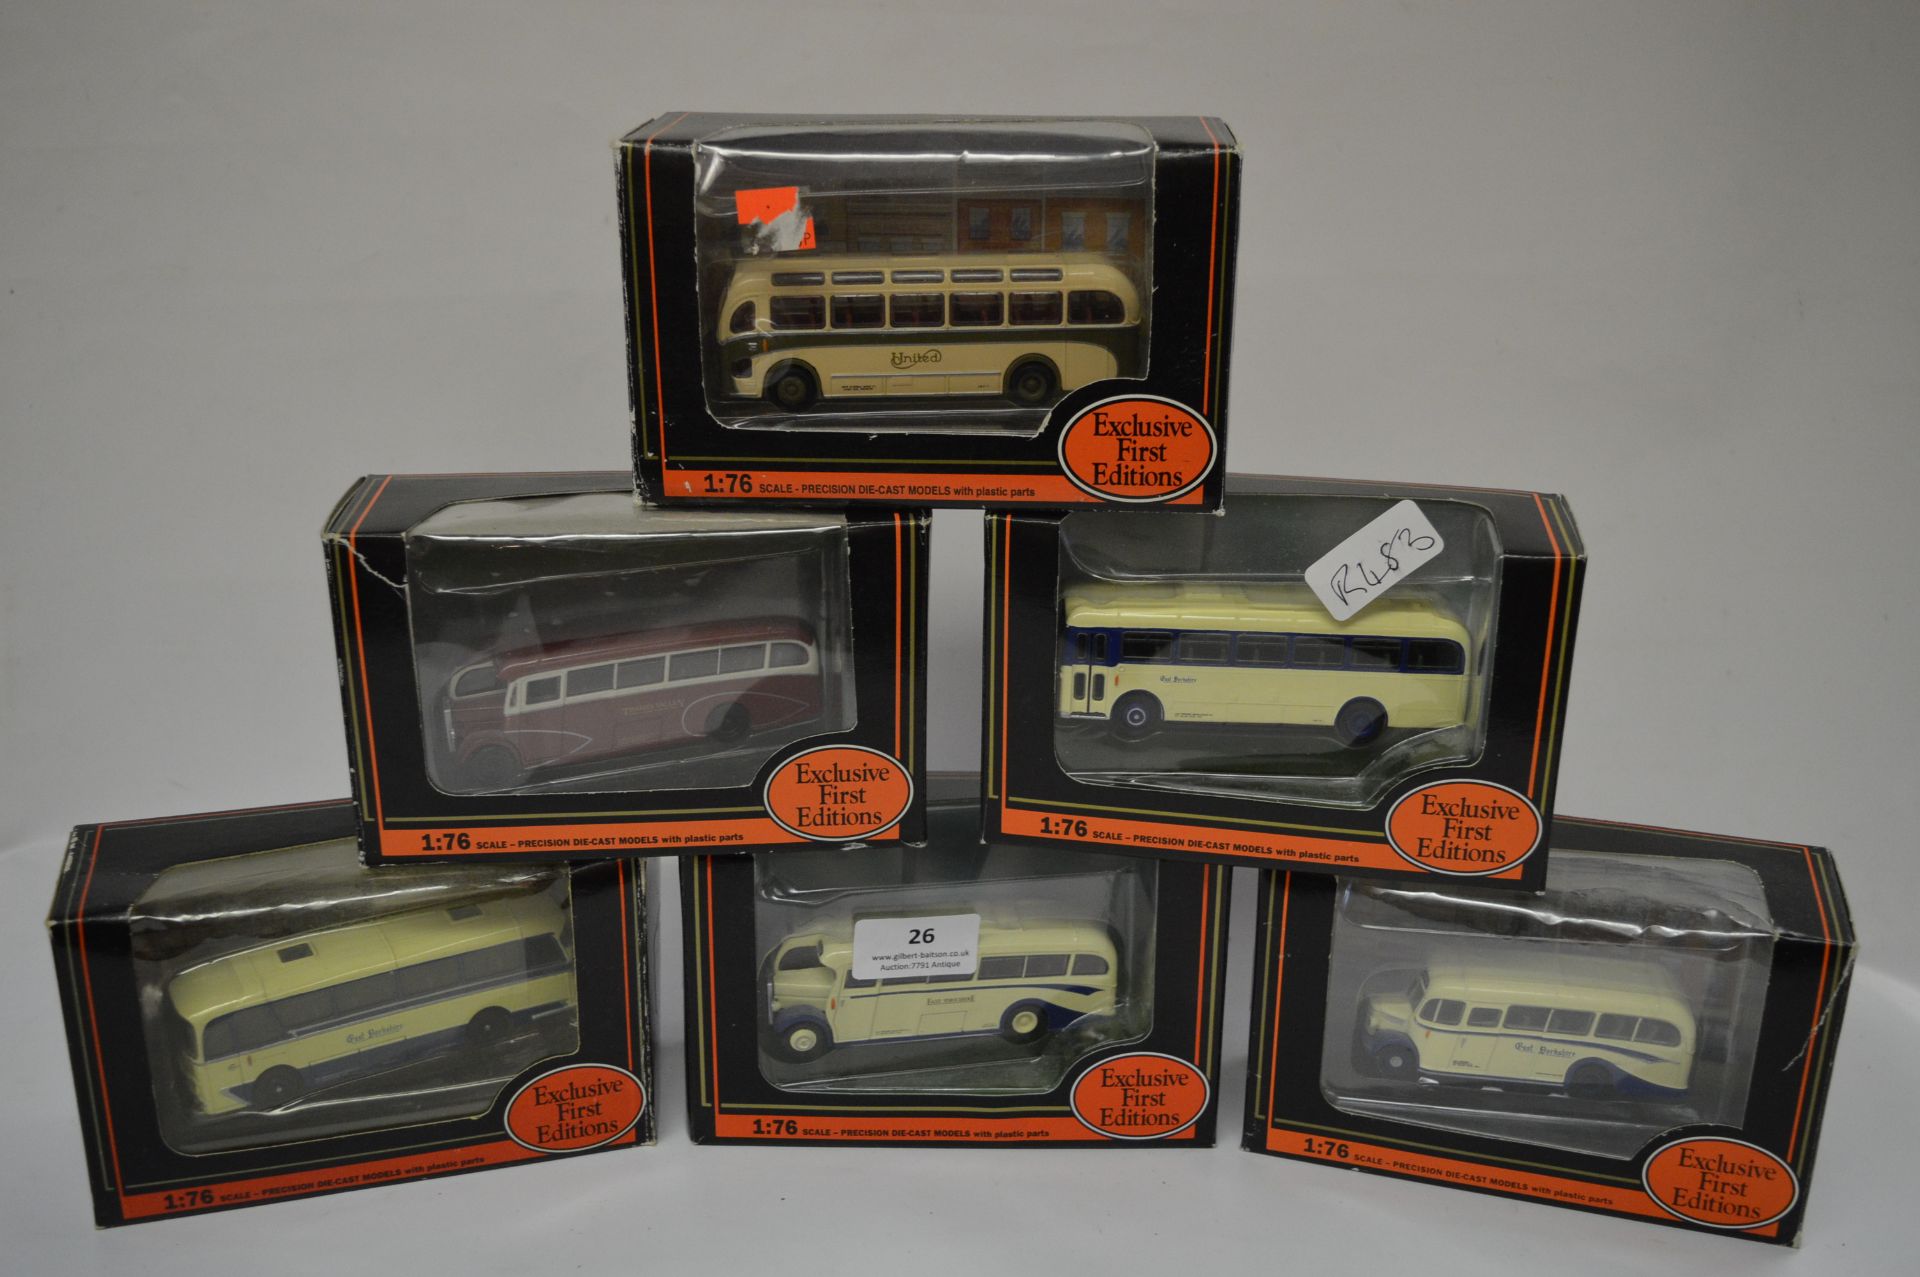 Six Diecast Models of Buses